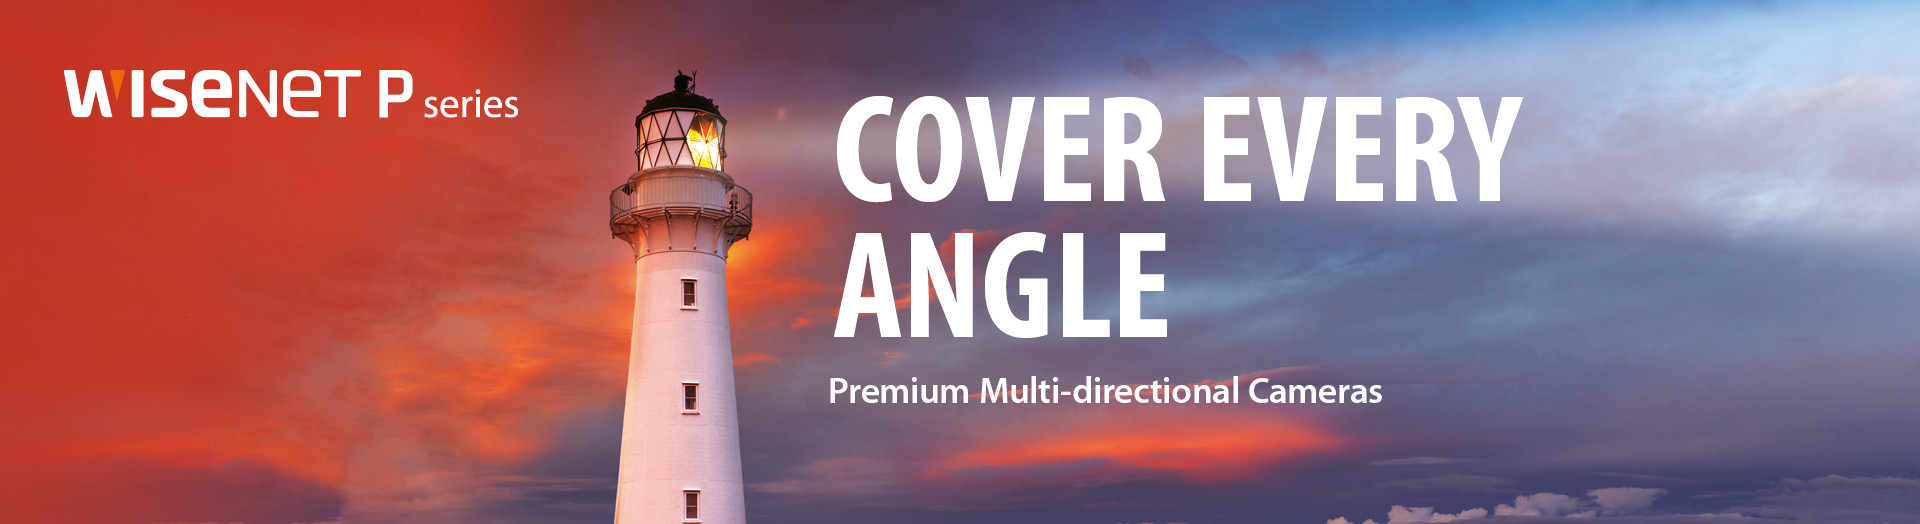 cover every angle in Qatar with Hanwha P series